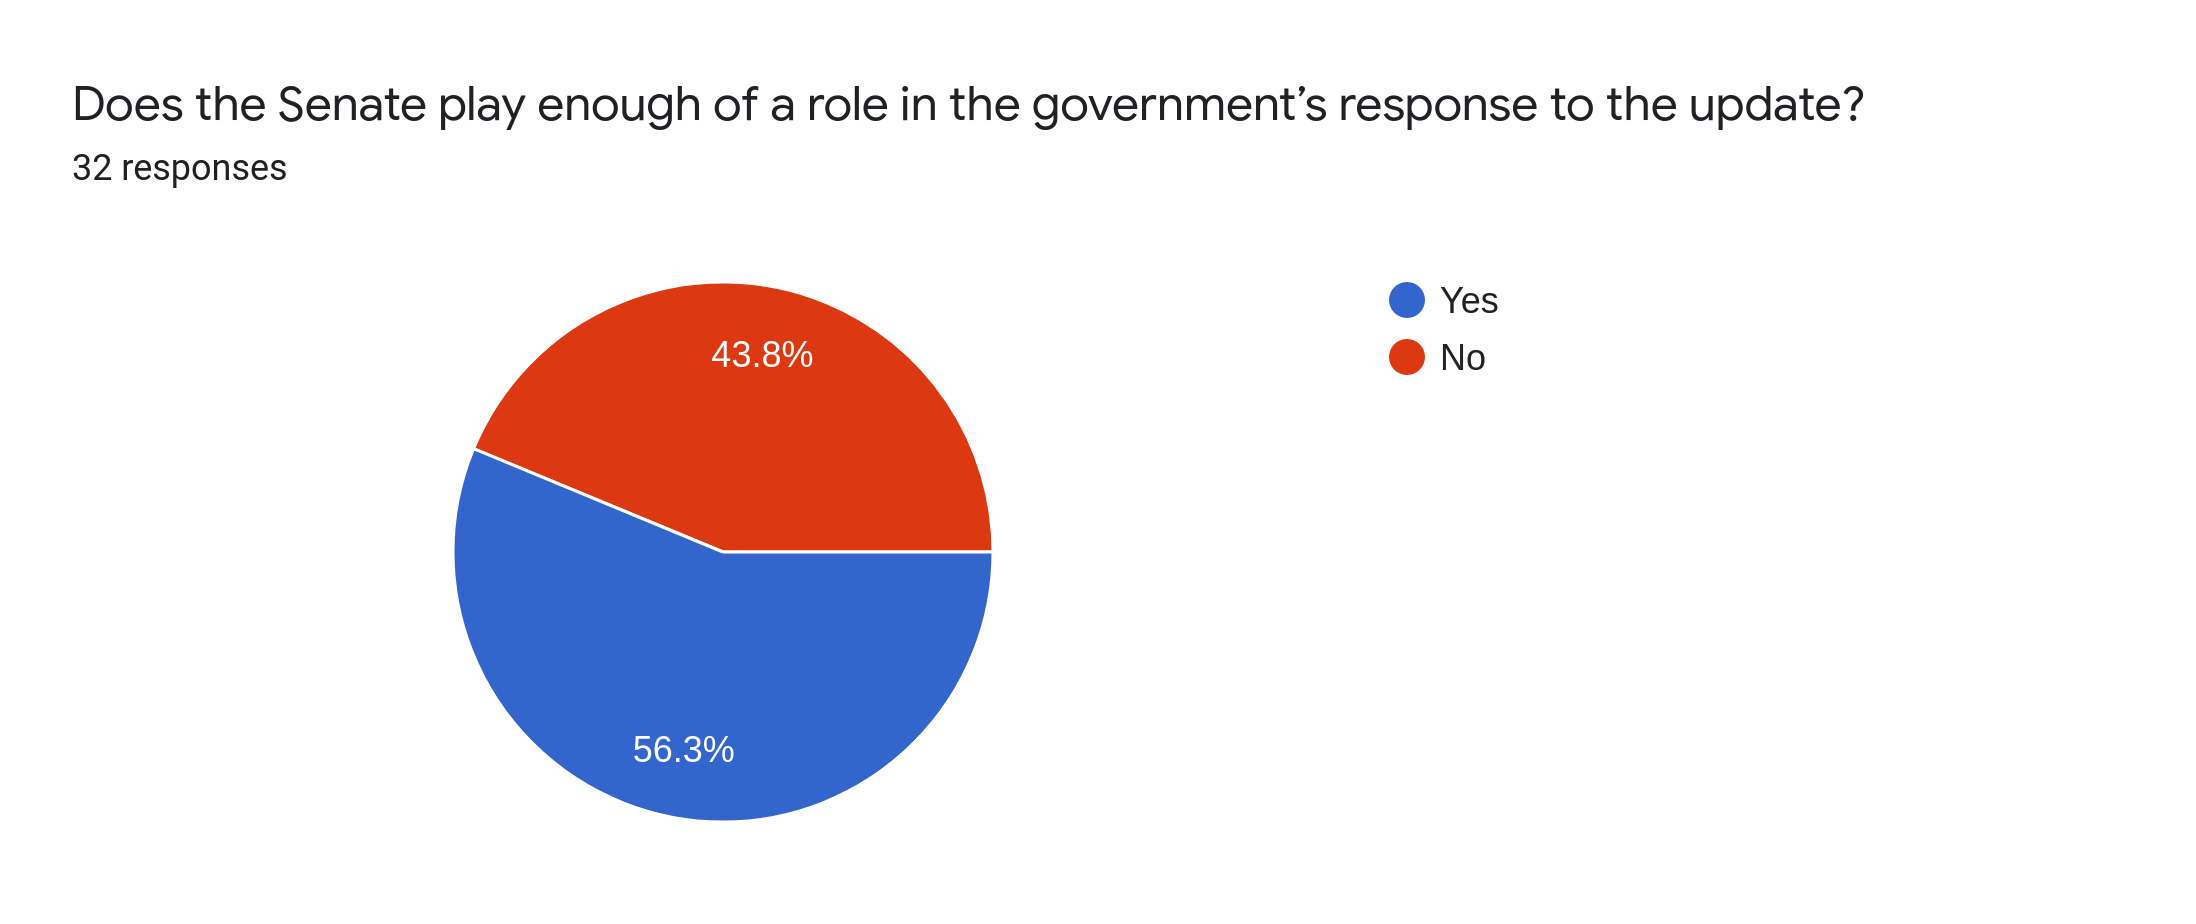 Forms response chart. Question title: Does the Senate play enough of a role in the government’s response to the update?. Number of responses: 32 responses.